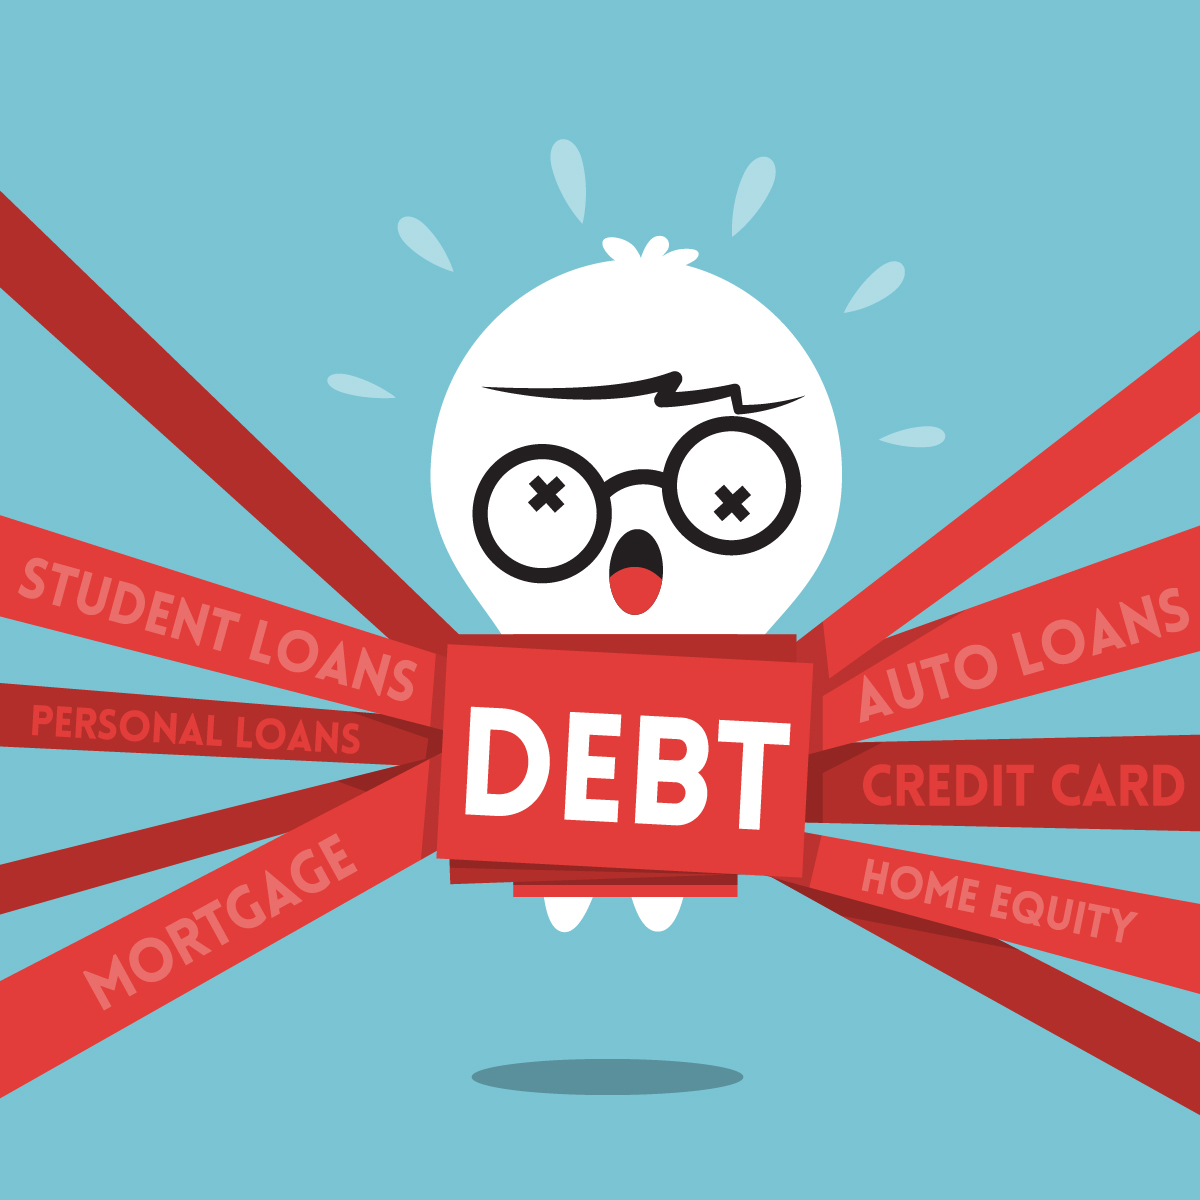 Is Debt Bad? Exploring the Truth About Financial Borrowing and Management